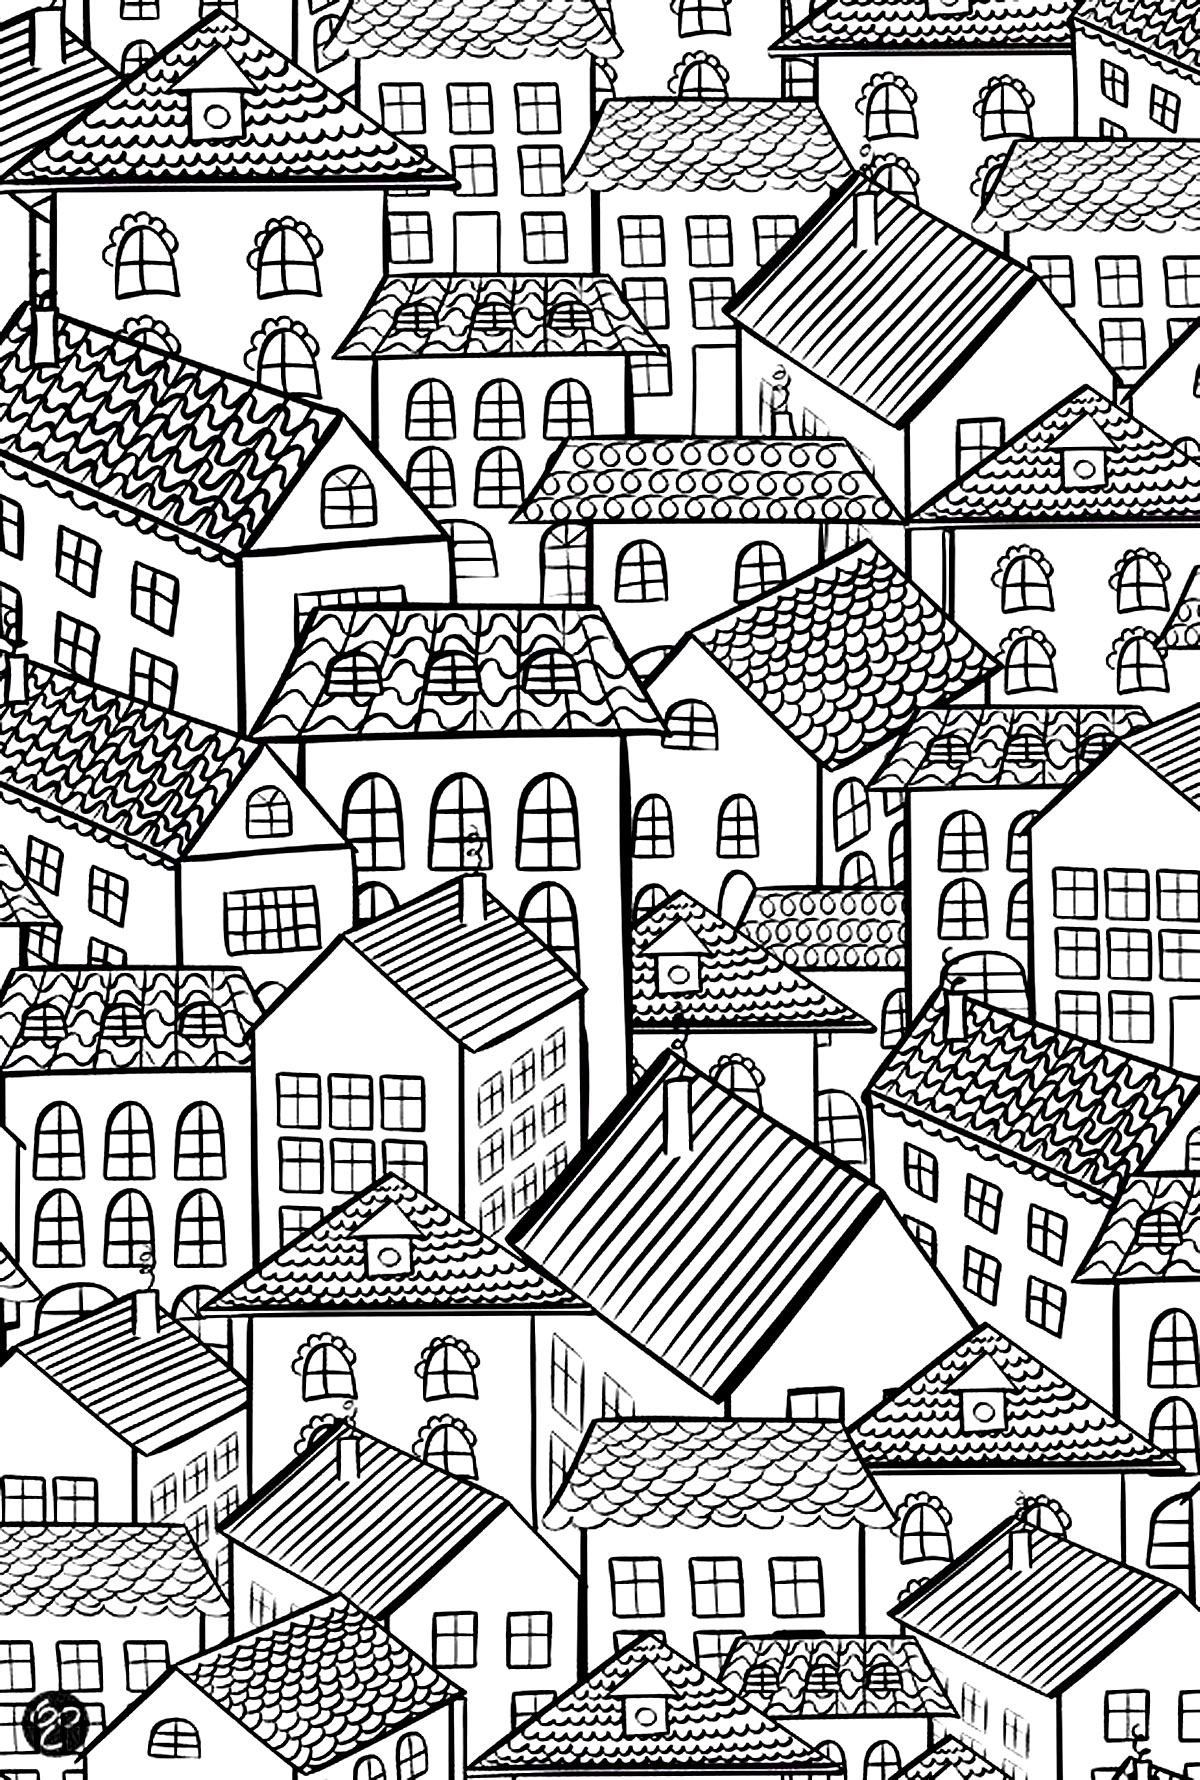 Download Architecture village roofs - Architecture Adult Coloring Pages